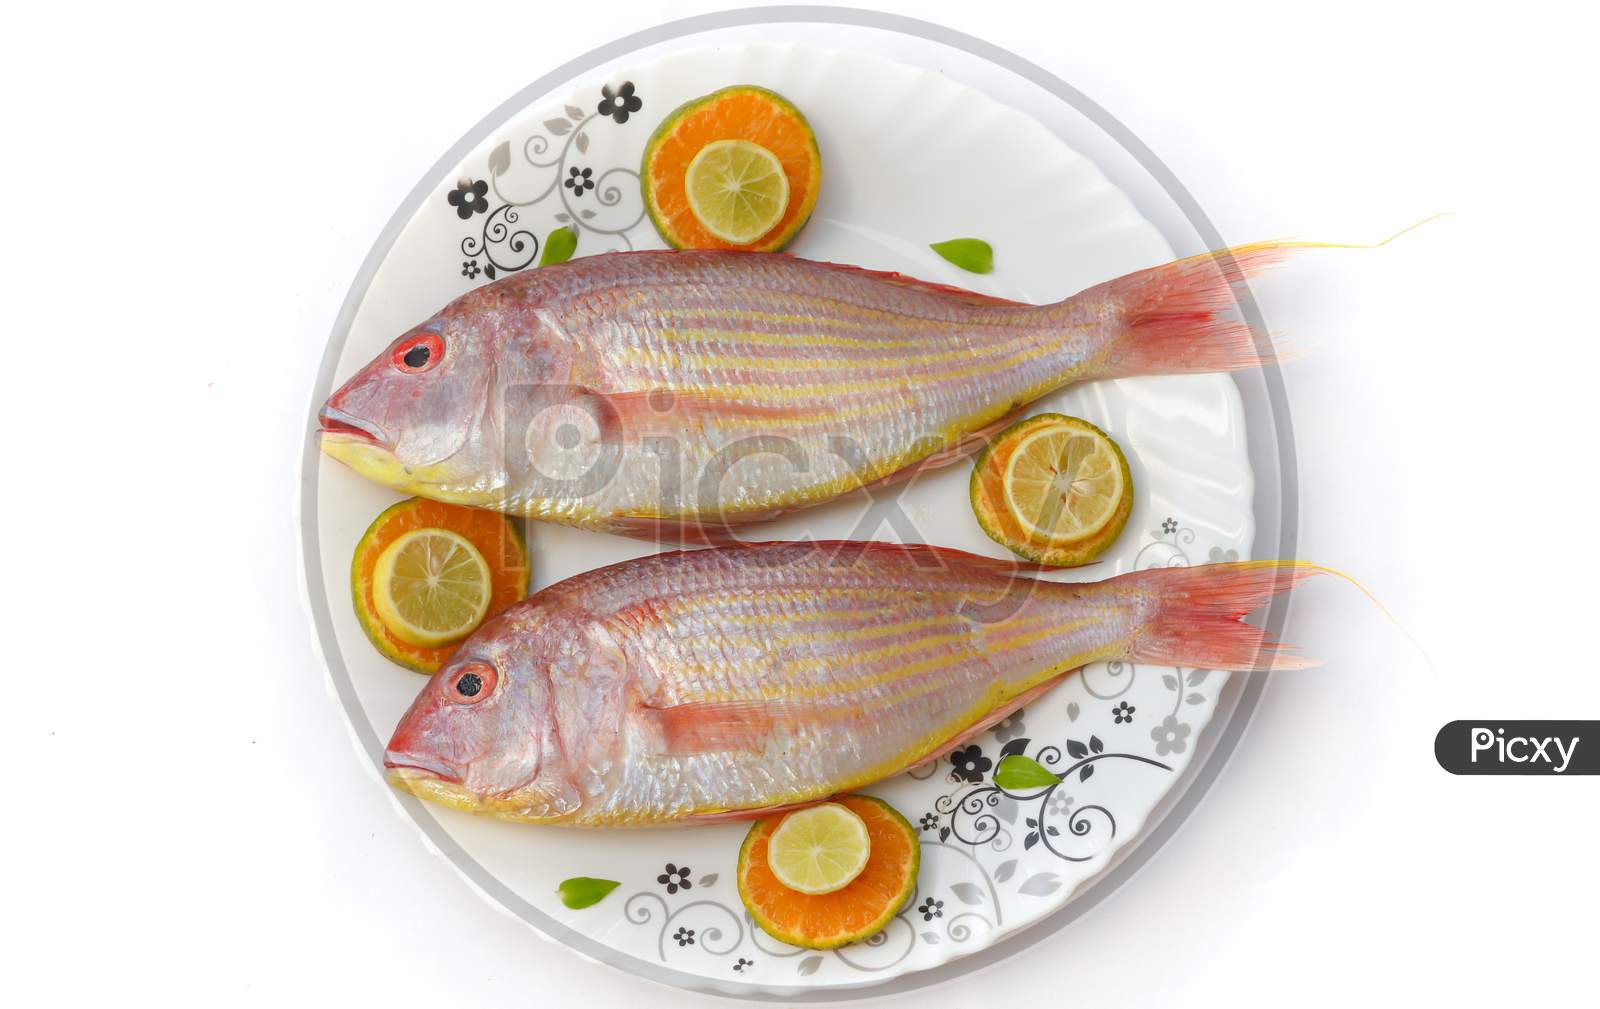 Close Up View Of Fresh Pink Perch (Thread Finned Bream) Decorated With Lemon Slice,Orange Slice And Curry Leaves On A White Plate,White Background,Selective Focus.